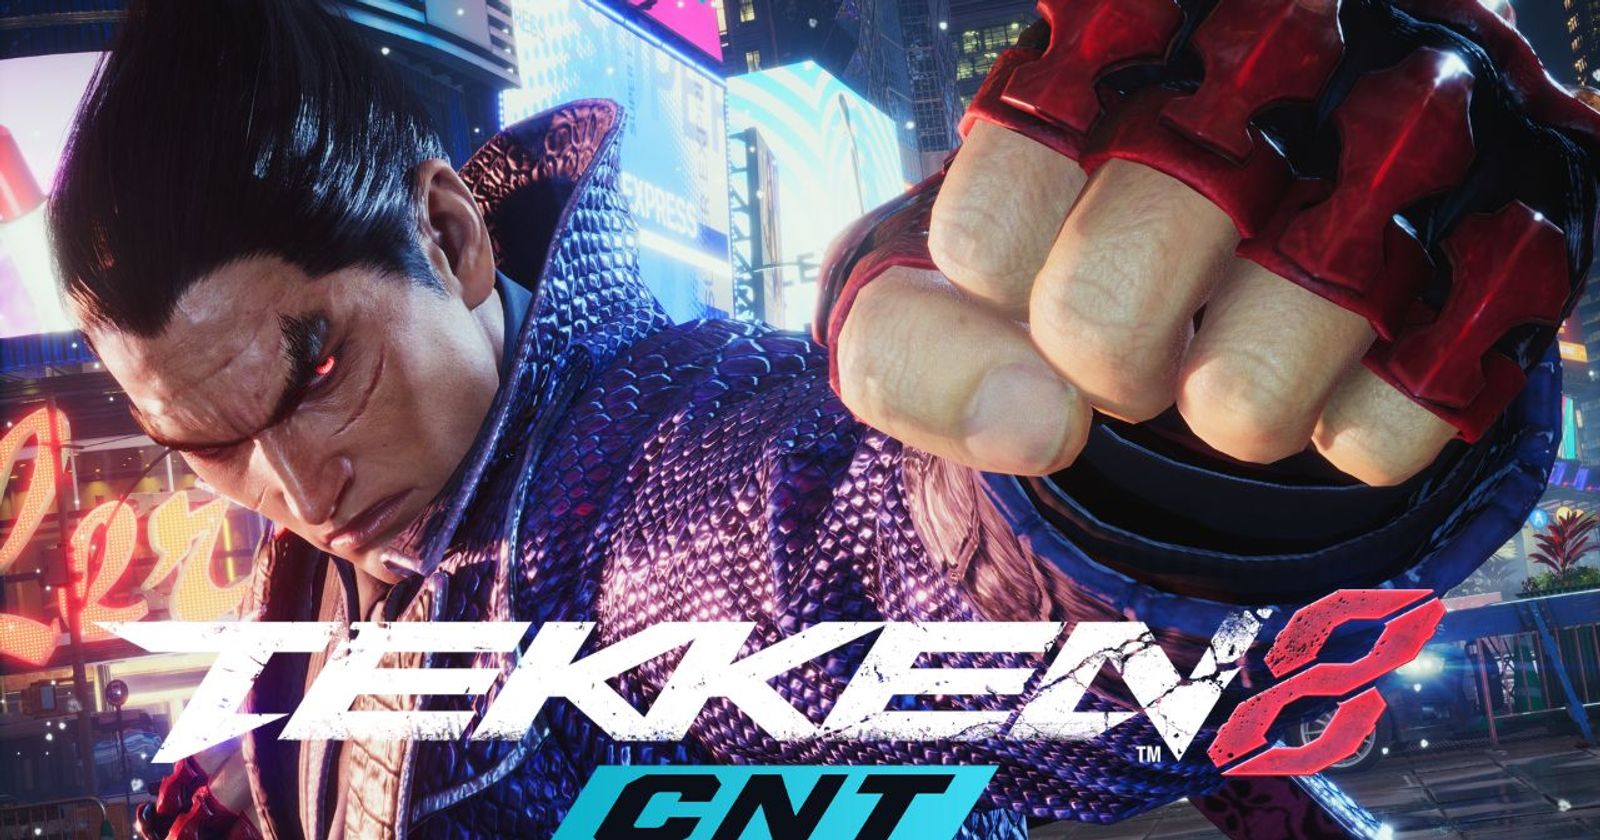 Players gain access to Tekken 8 beta on PC early